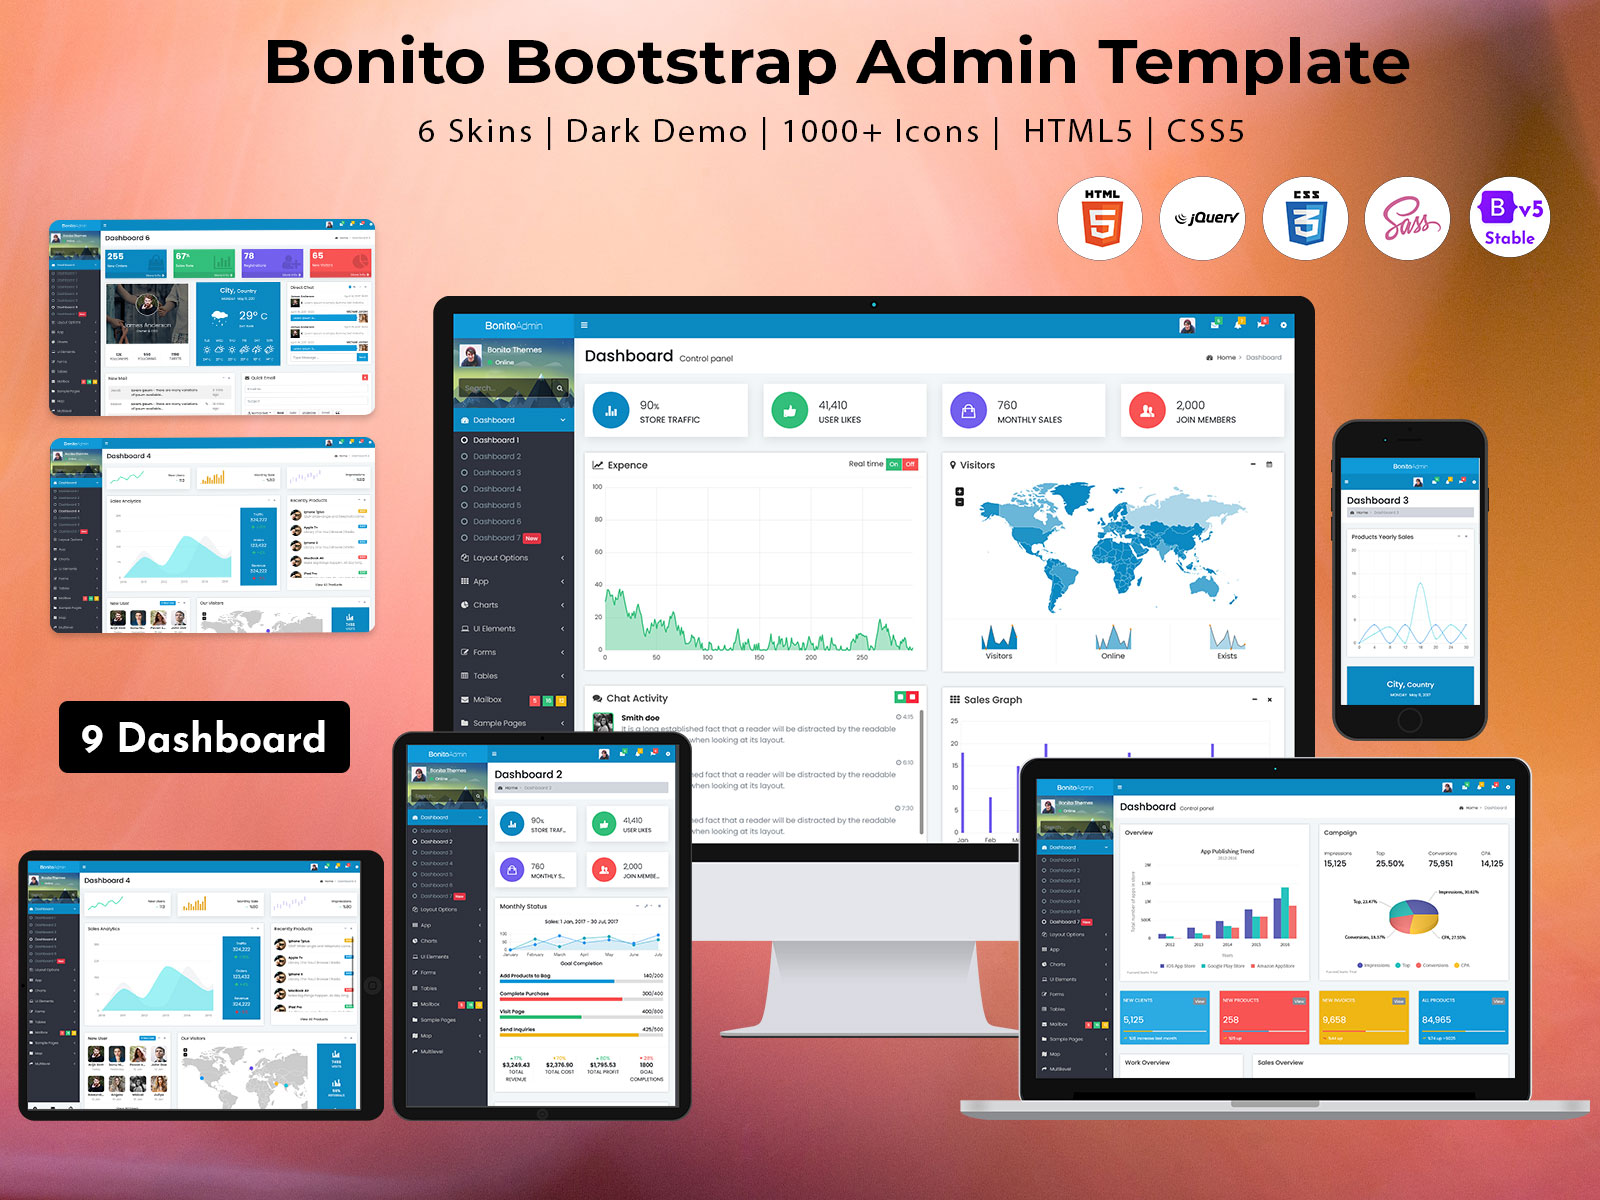 Bonito – Find The Bootstrap Admin Template That Best Fits Your Project